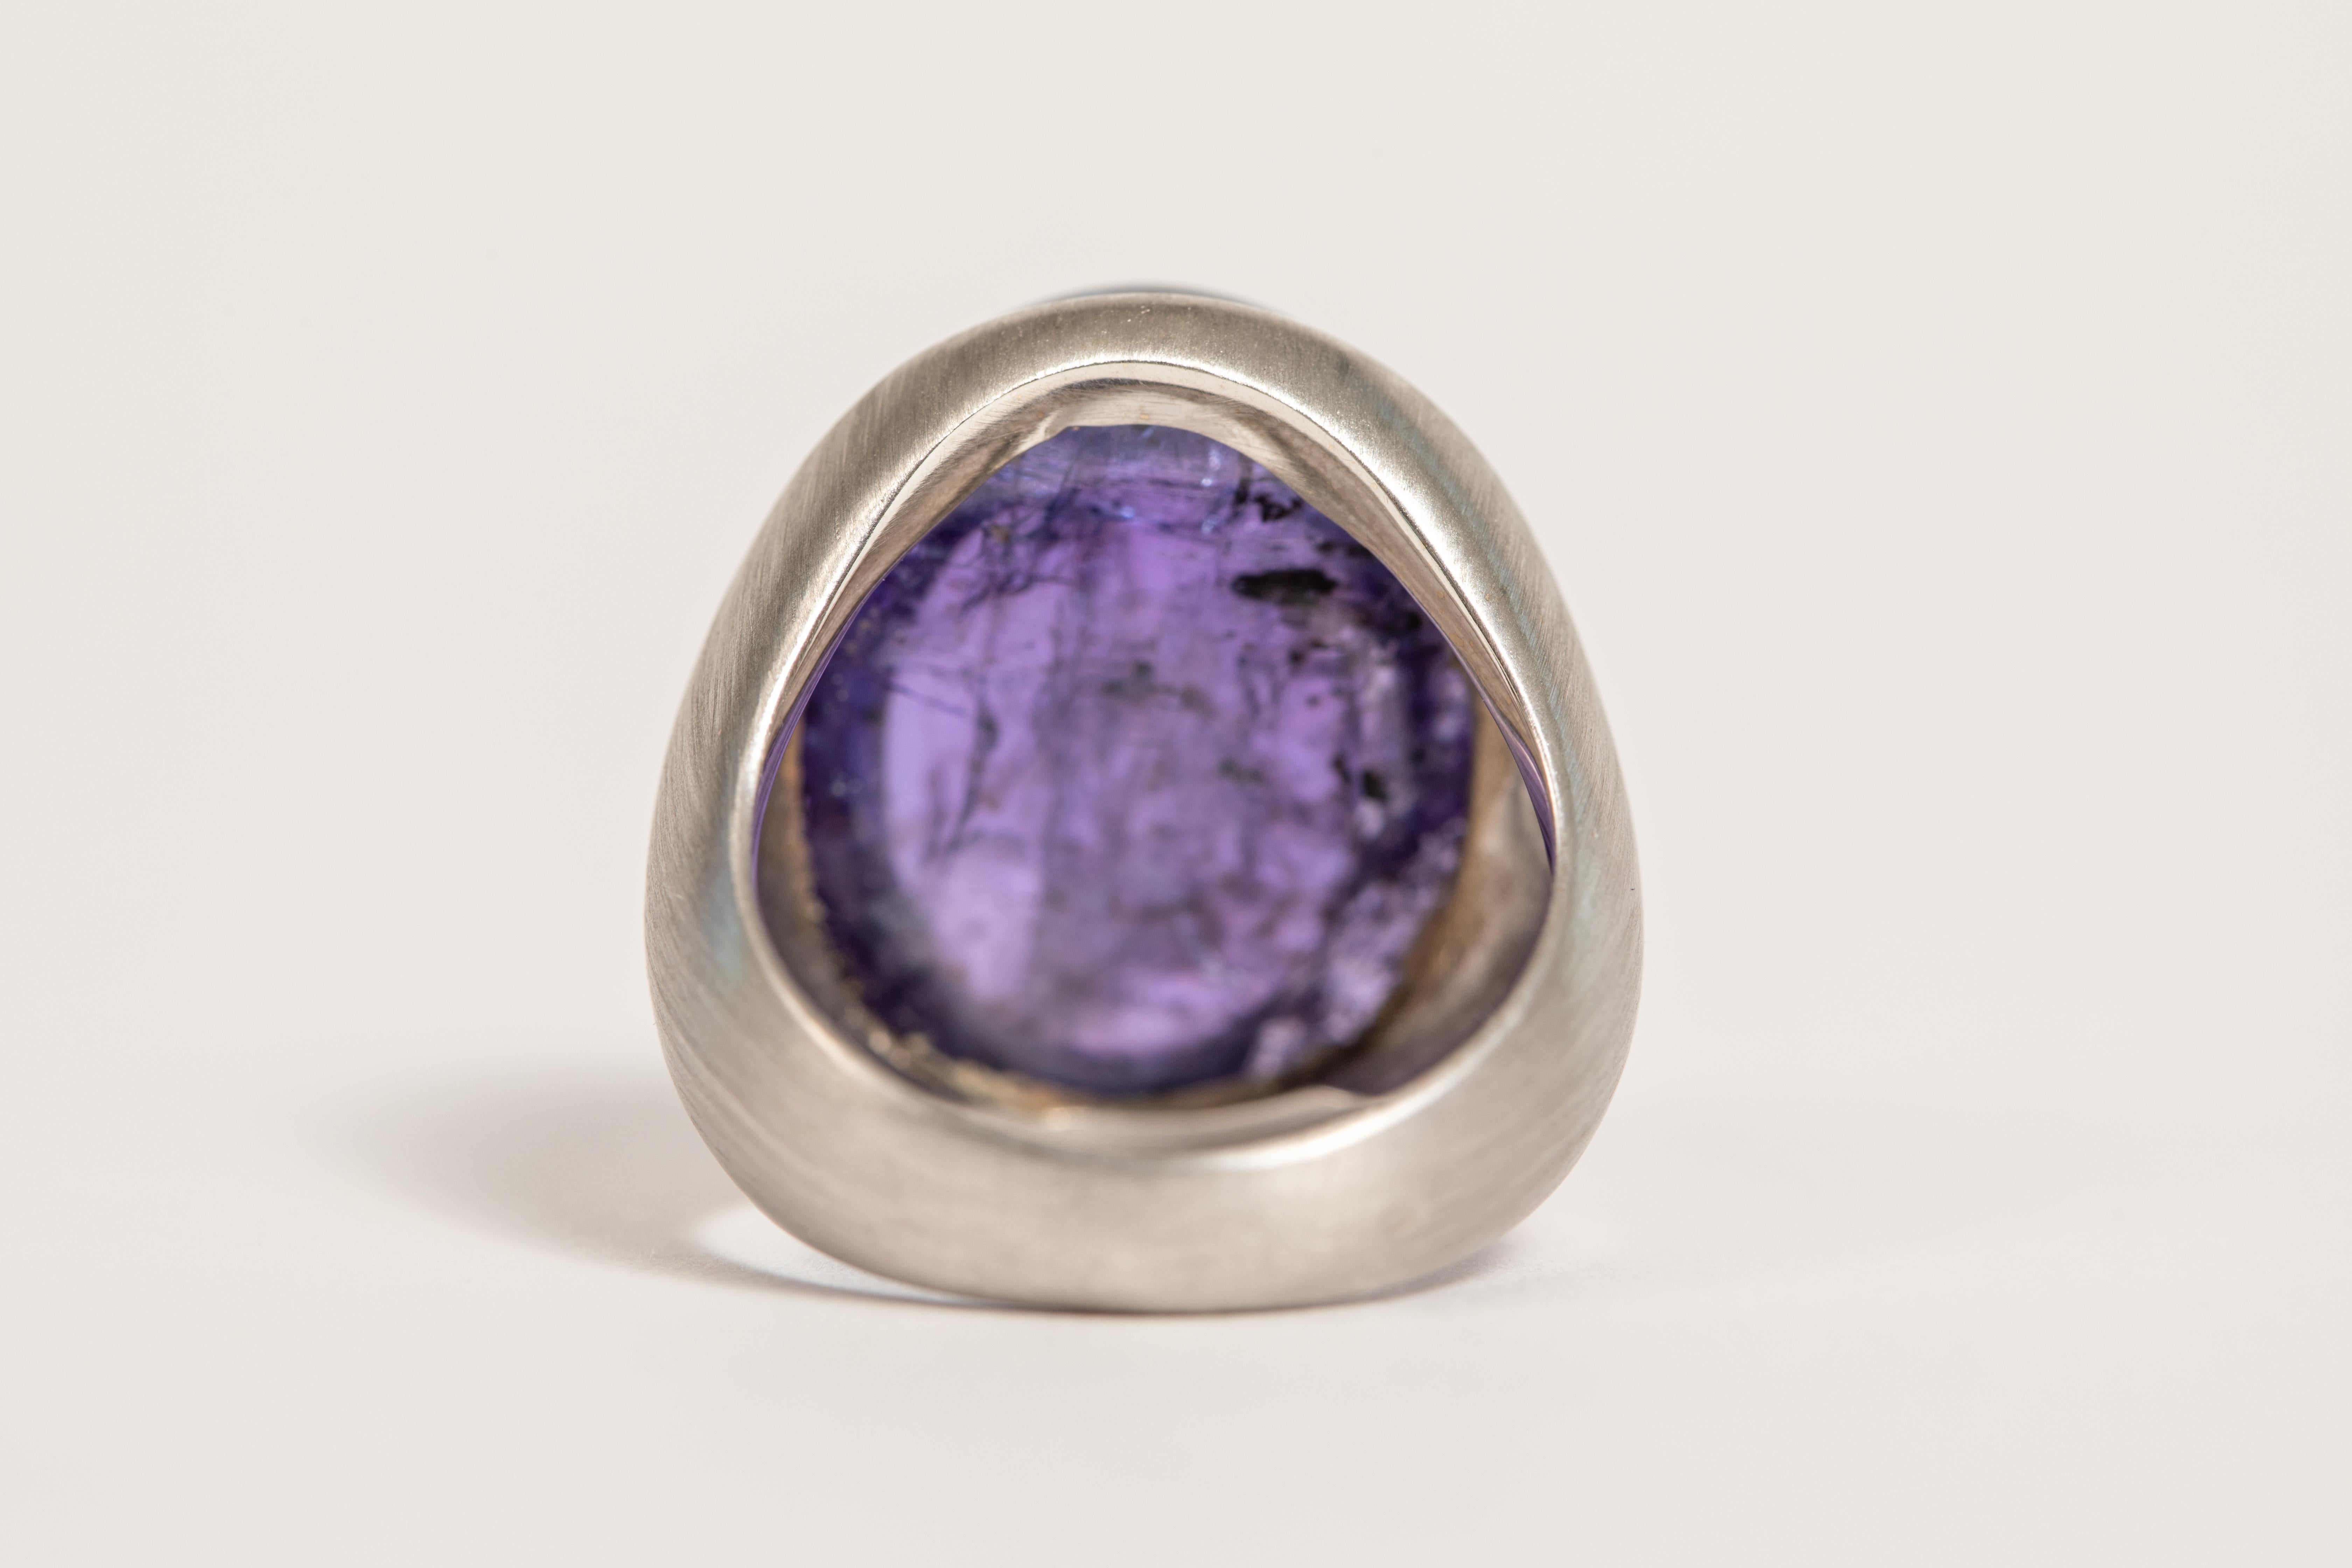 18 K White Gold Brushed Ring with a Gorgeous Tanzanite Cabochon 36.97 Ct For Sale 2